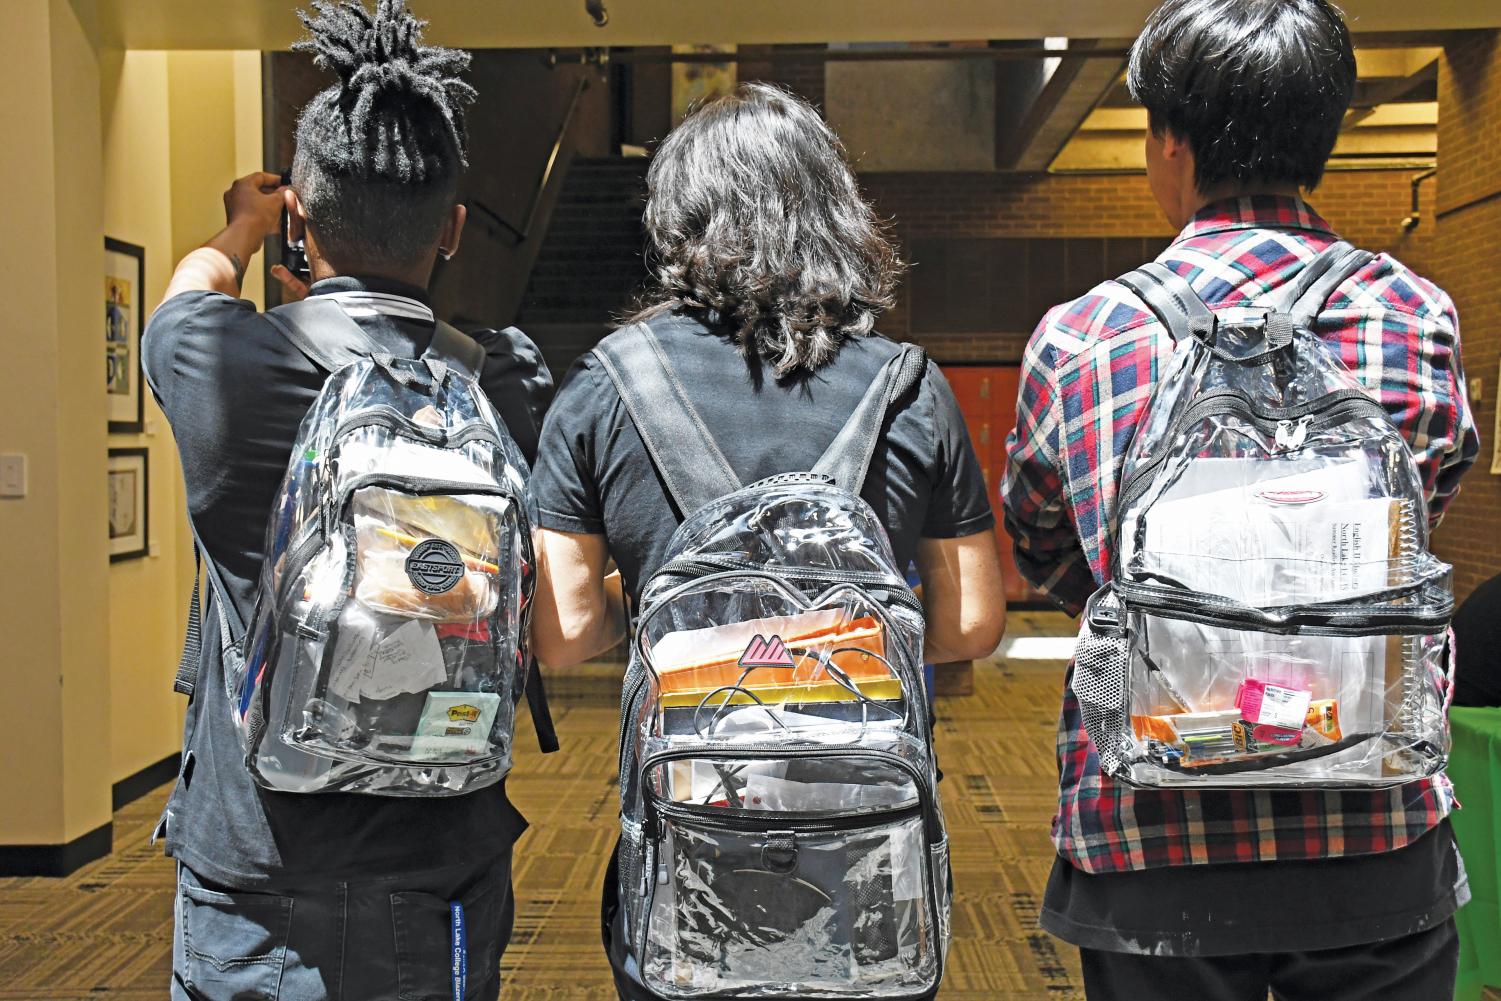 Will DISD Clear Bag Policy Keep Students Safe?